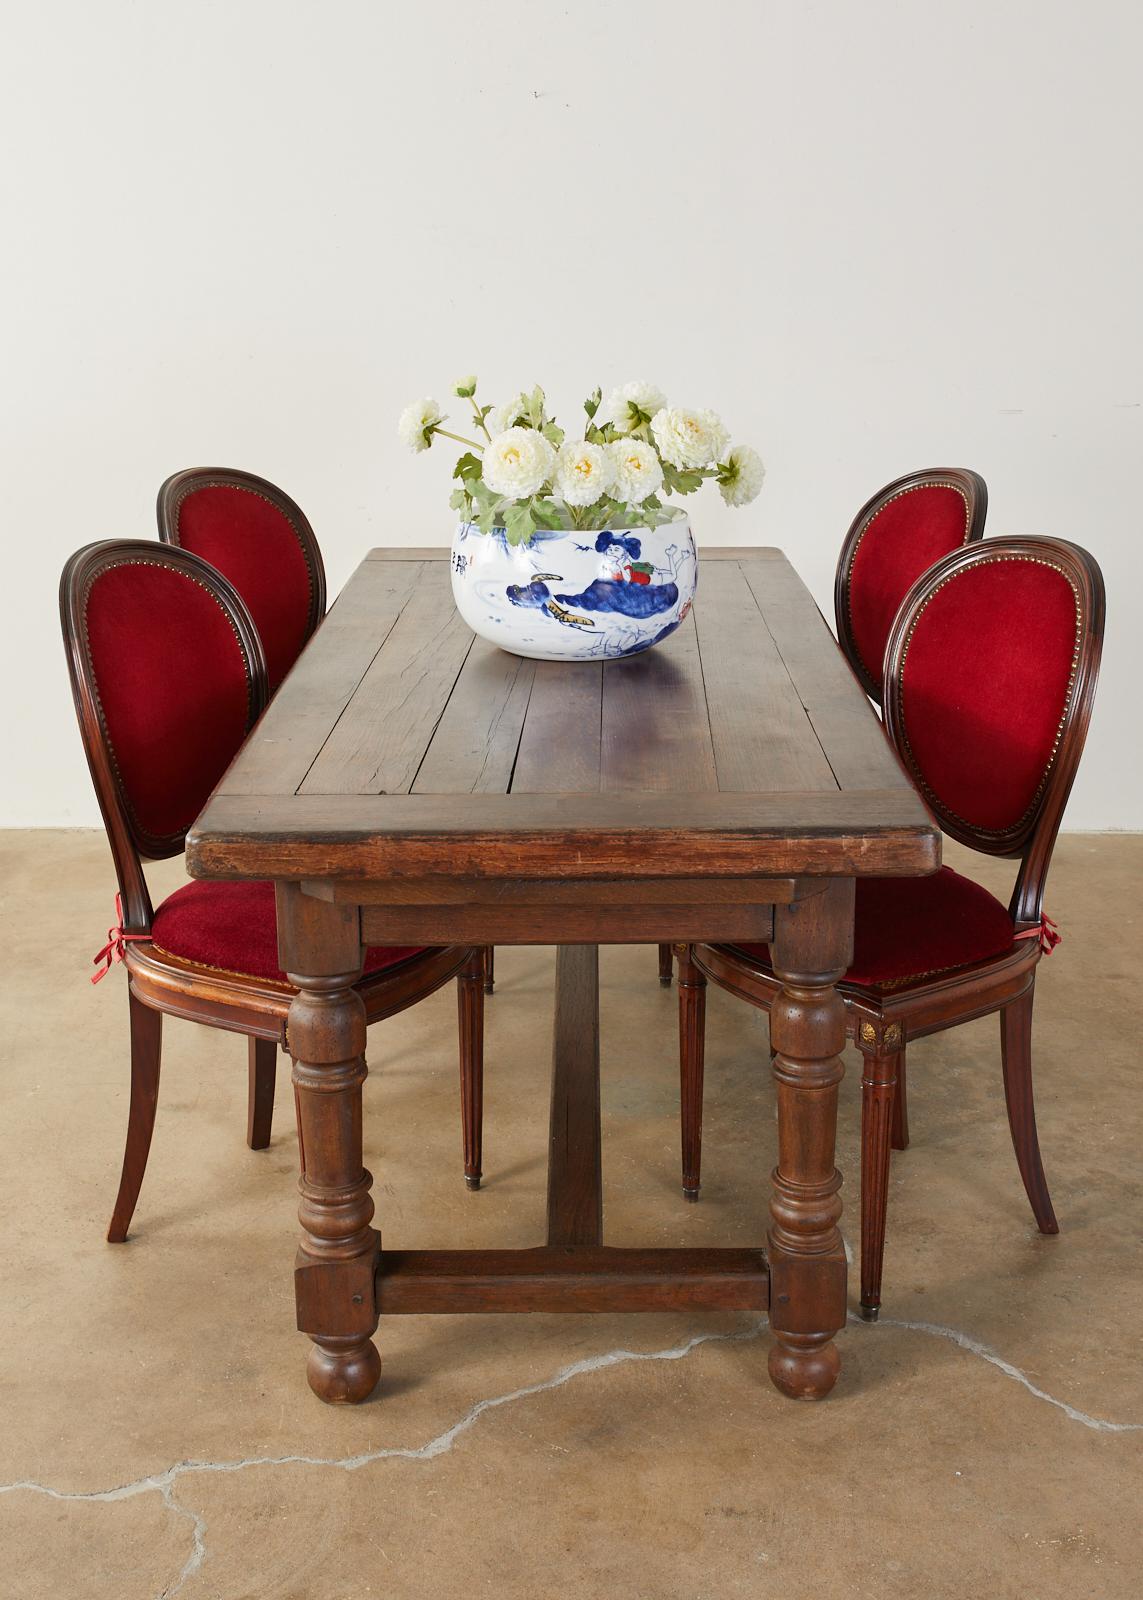 Dramatic set of six French mahogany caned dining chairs made in the Louis XVI taste. The chairs feature a rich velvet red upholstered back and loose seat cushion over cane. Classic French oval backs bordered with brass tack nail heads. The